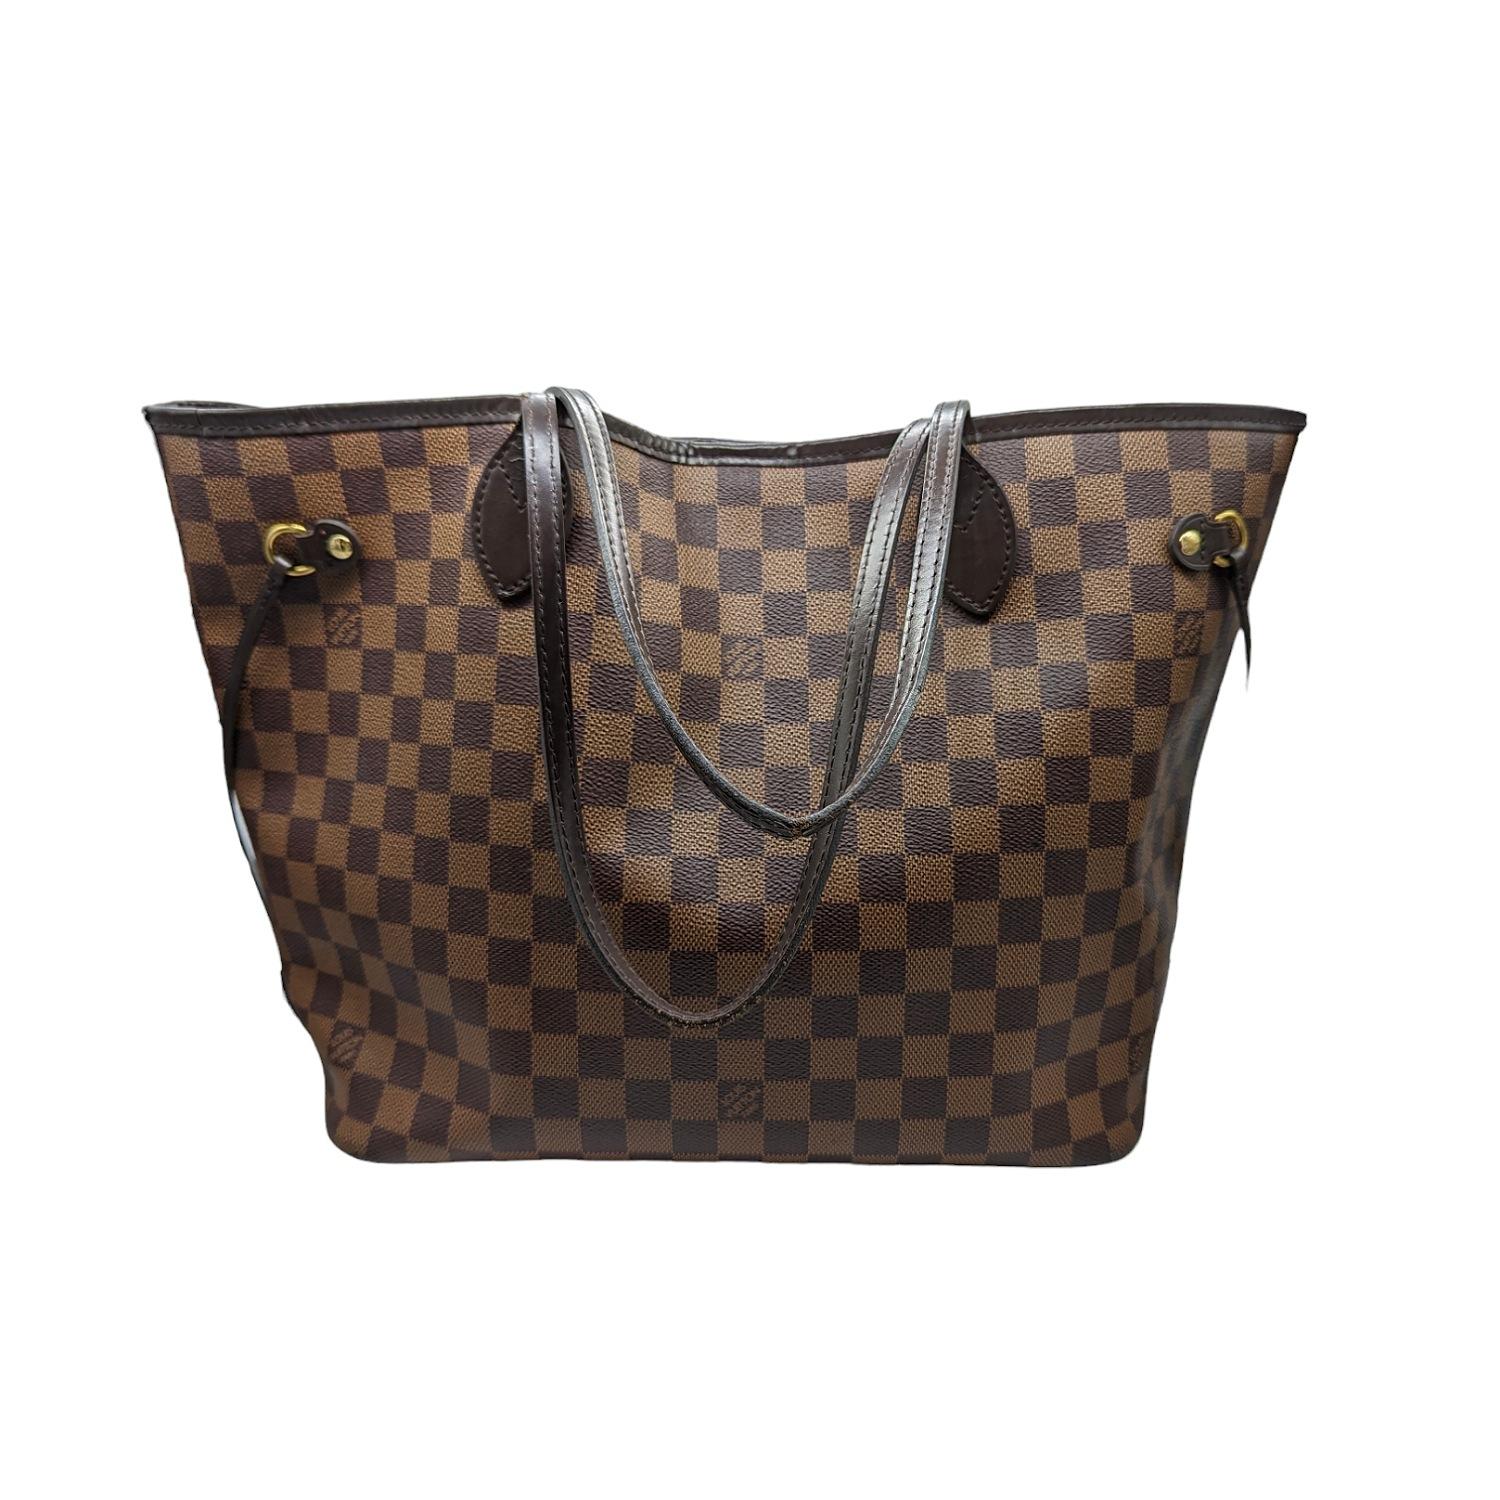 This chic tote is crafted of classic Louis Vuitton Damier in brown on coated canvas. The shoulder bag features chocolate brown cowhide leather trim, shoulder straps, side cinch cords, and has polished brass hardware. The top is open to a striped